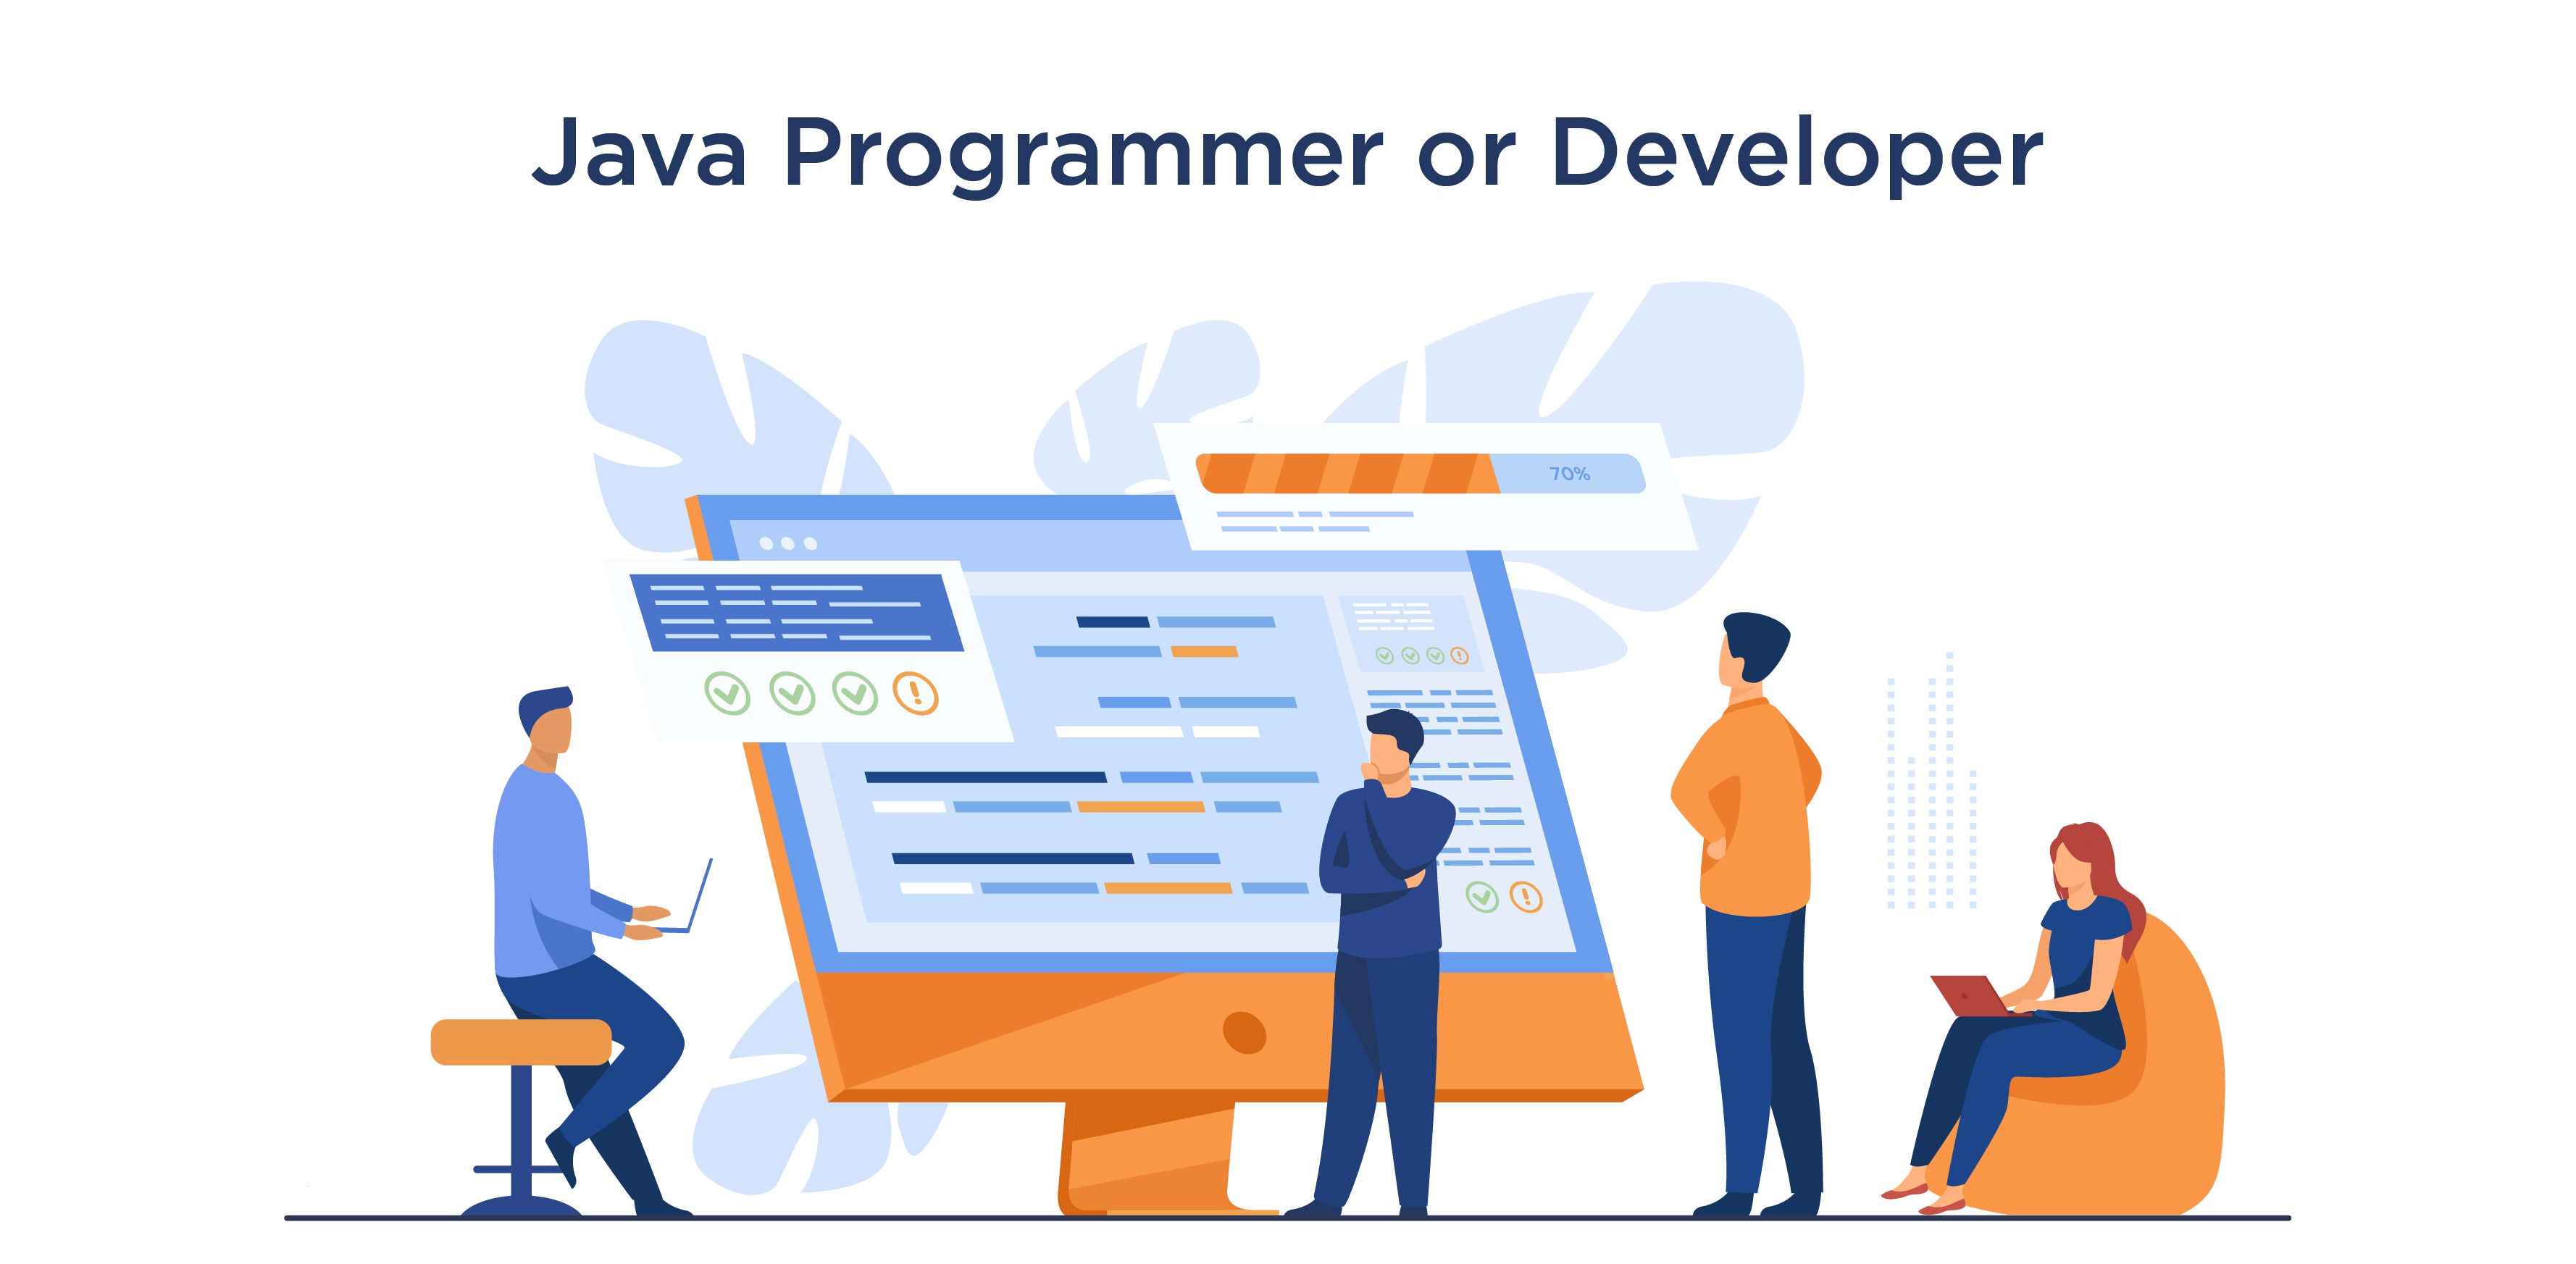 What exactly is a Java Programmer or Developer?